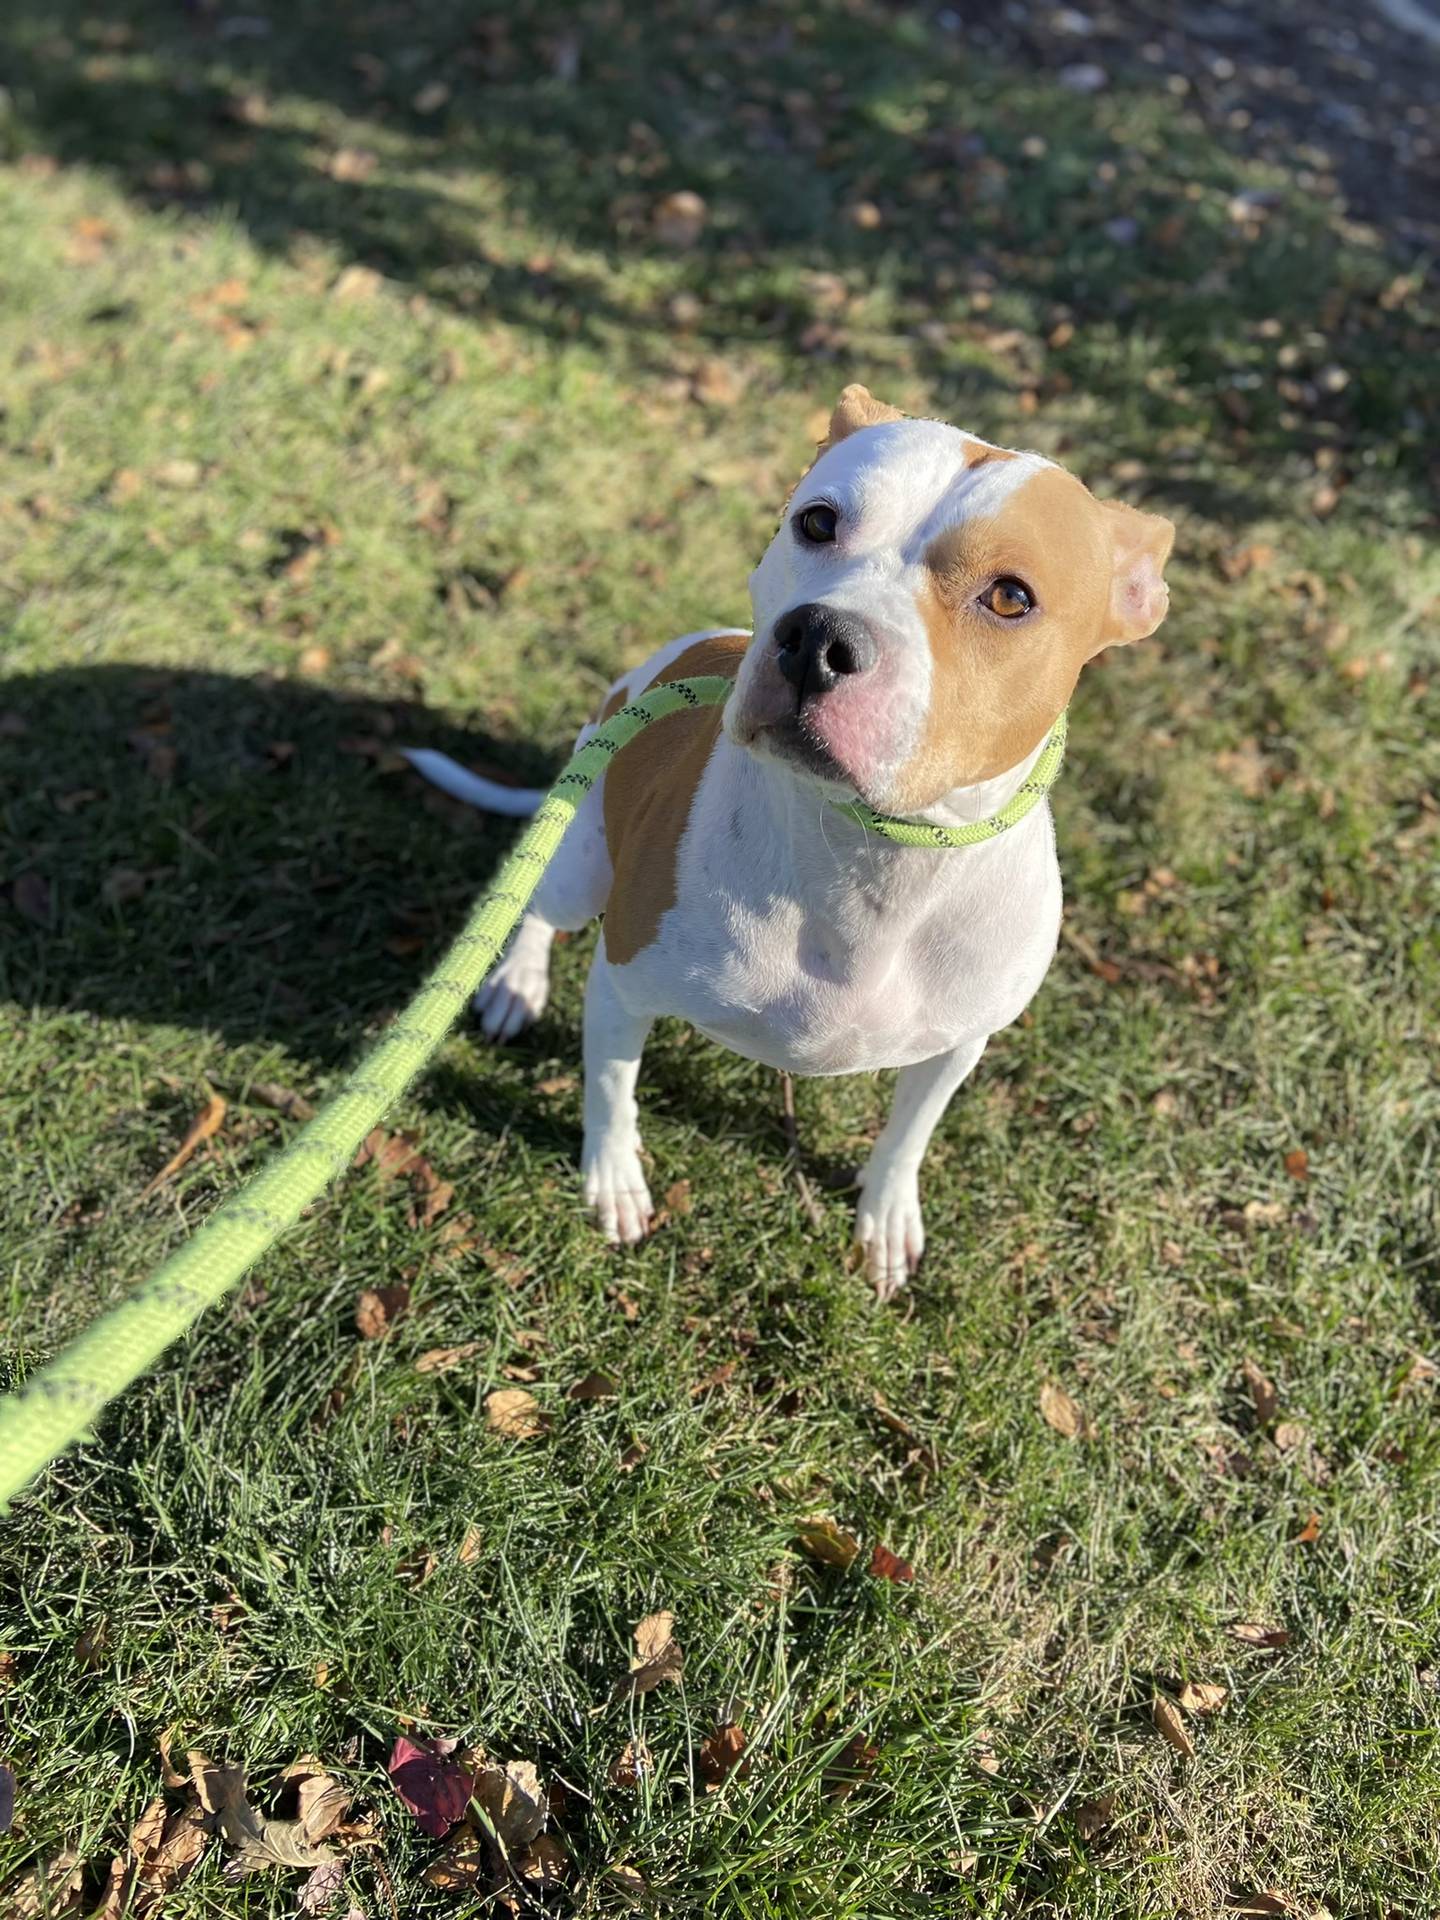 Denver is a 5-year-old female terrier mix. She is a friendly, laid-back, affectionate and loves to be near people. She needs to be the only pet in a home. She loves toys and is playful and silly. To meet Denver, email victoria@nawsus.org. Visit nawsus.org.